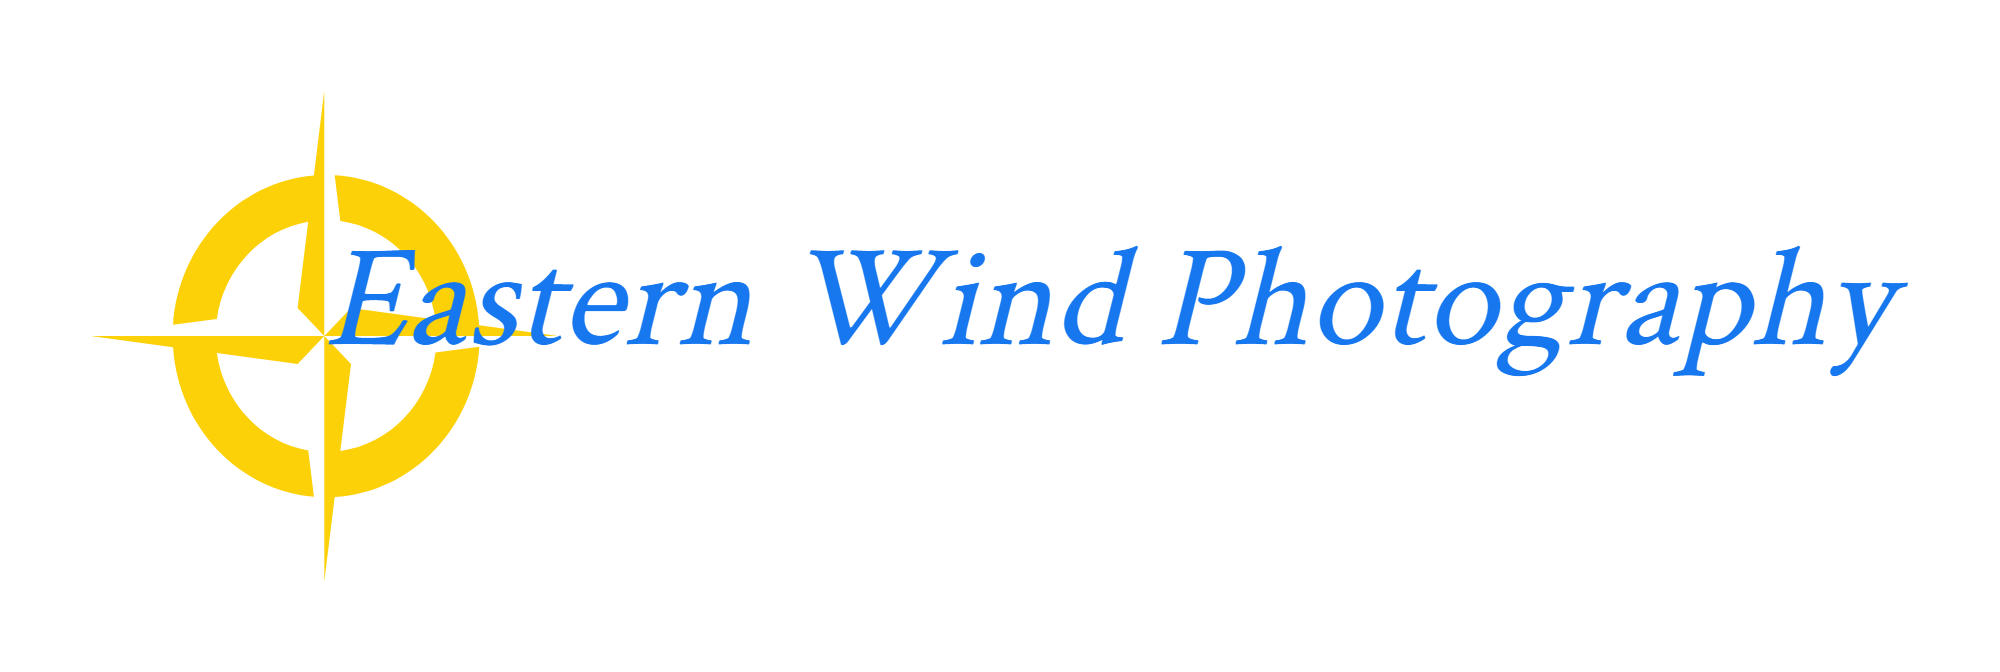 Eastern Wind Photography, Inc